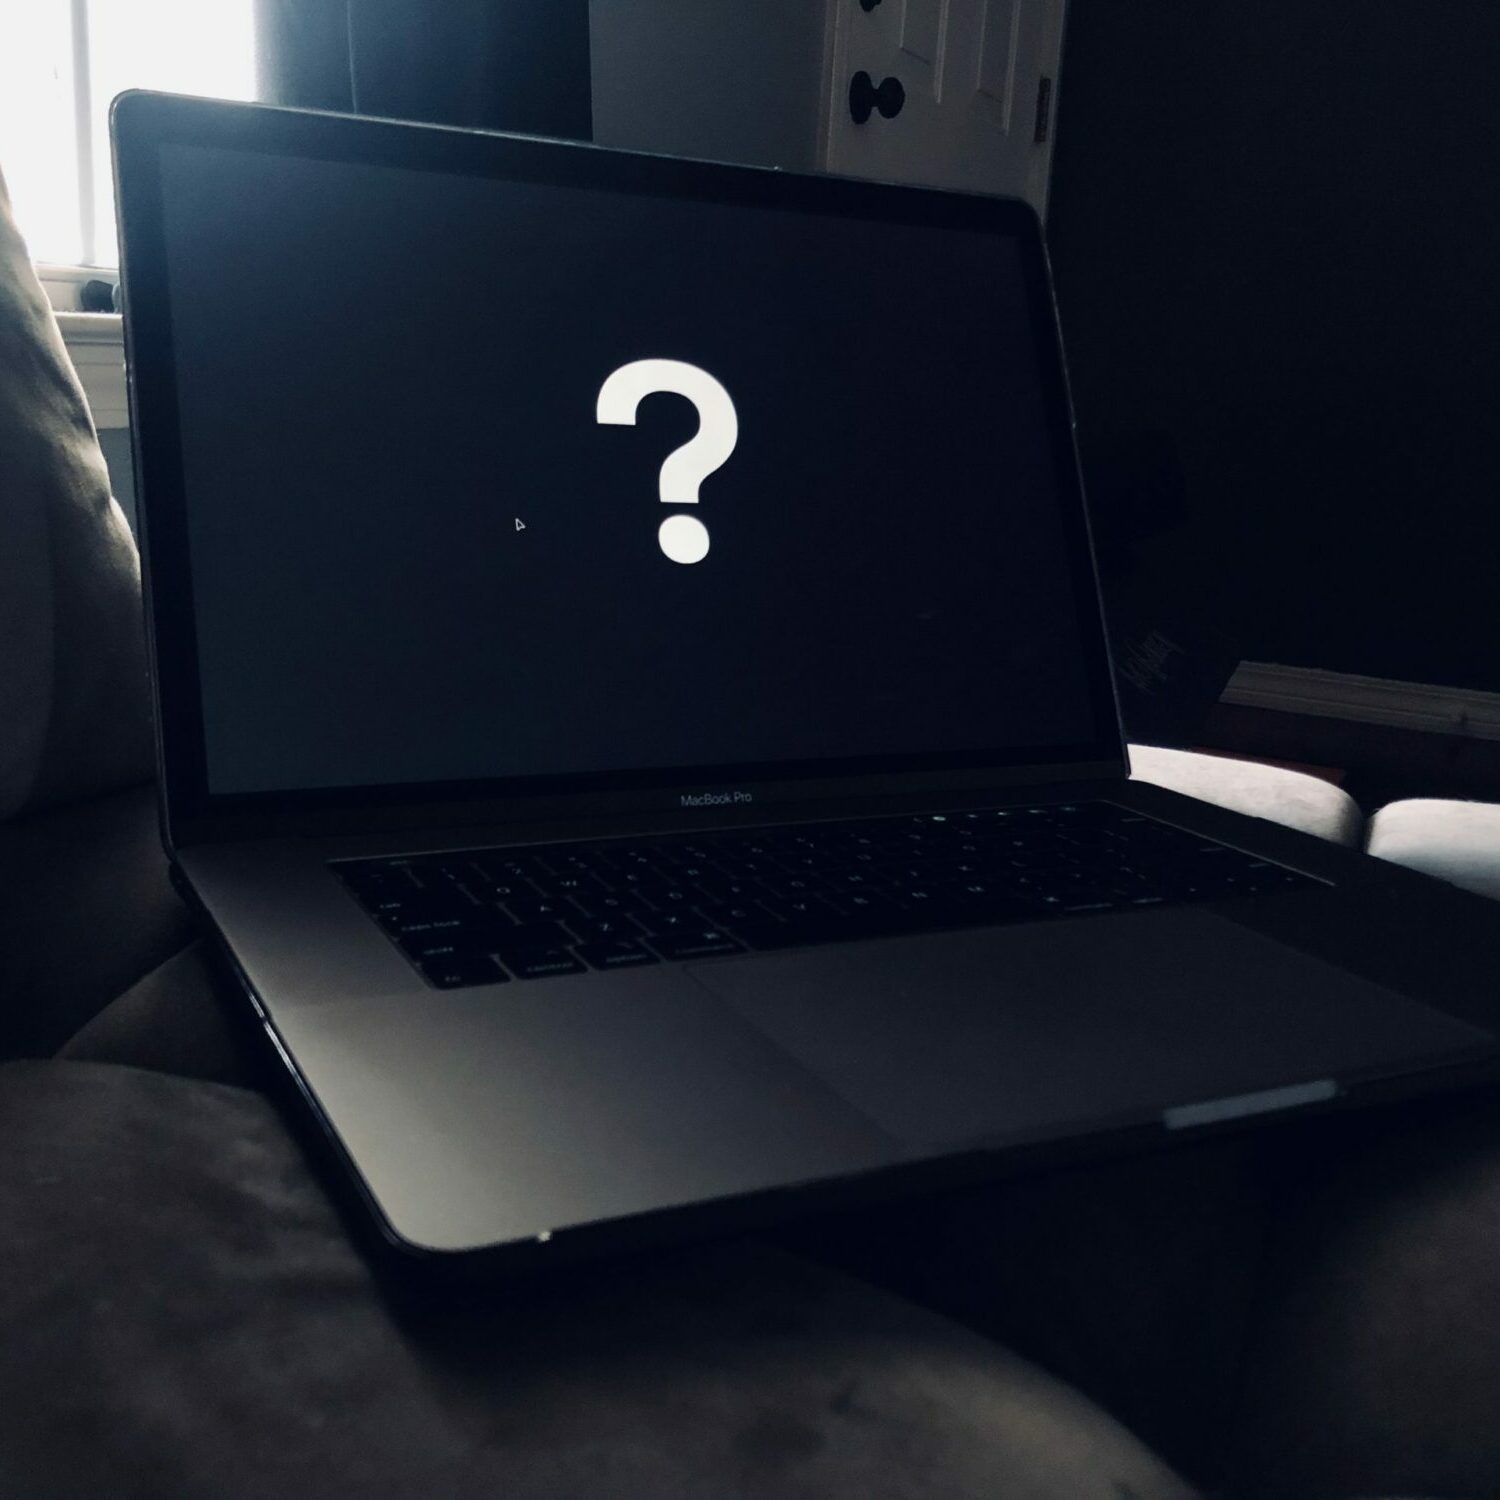 Photo of a laptop with a black screen and a large white question mark